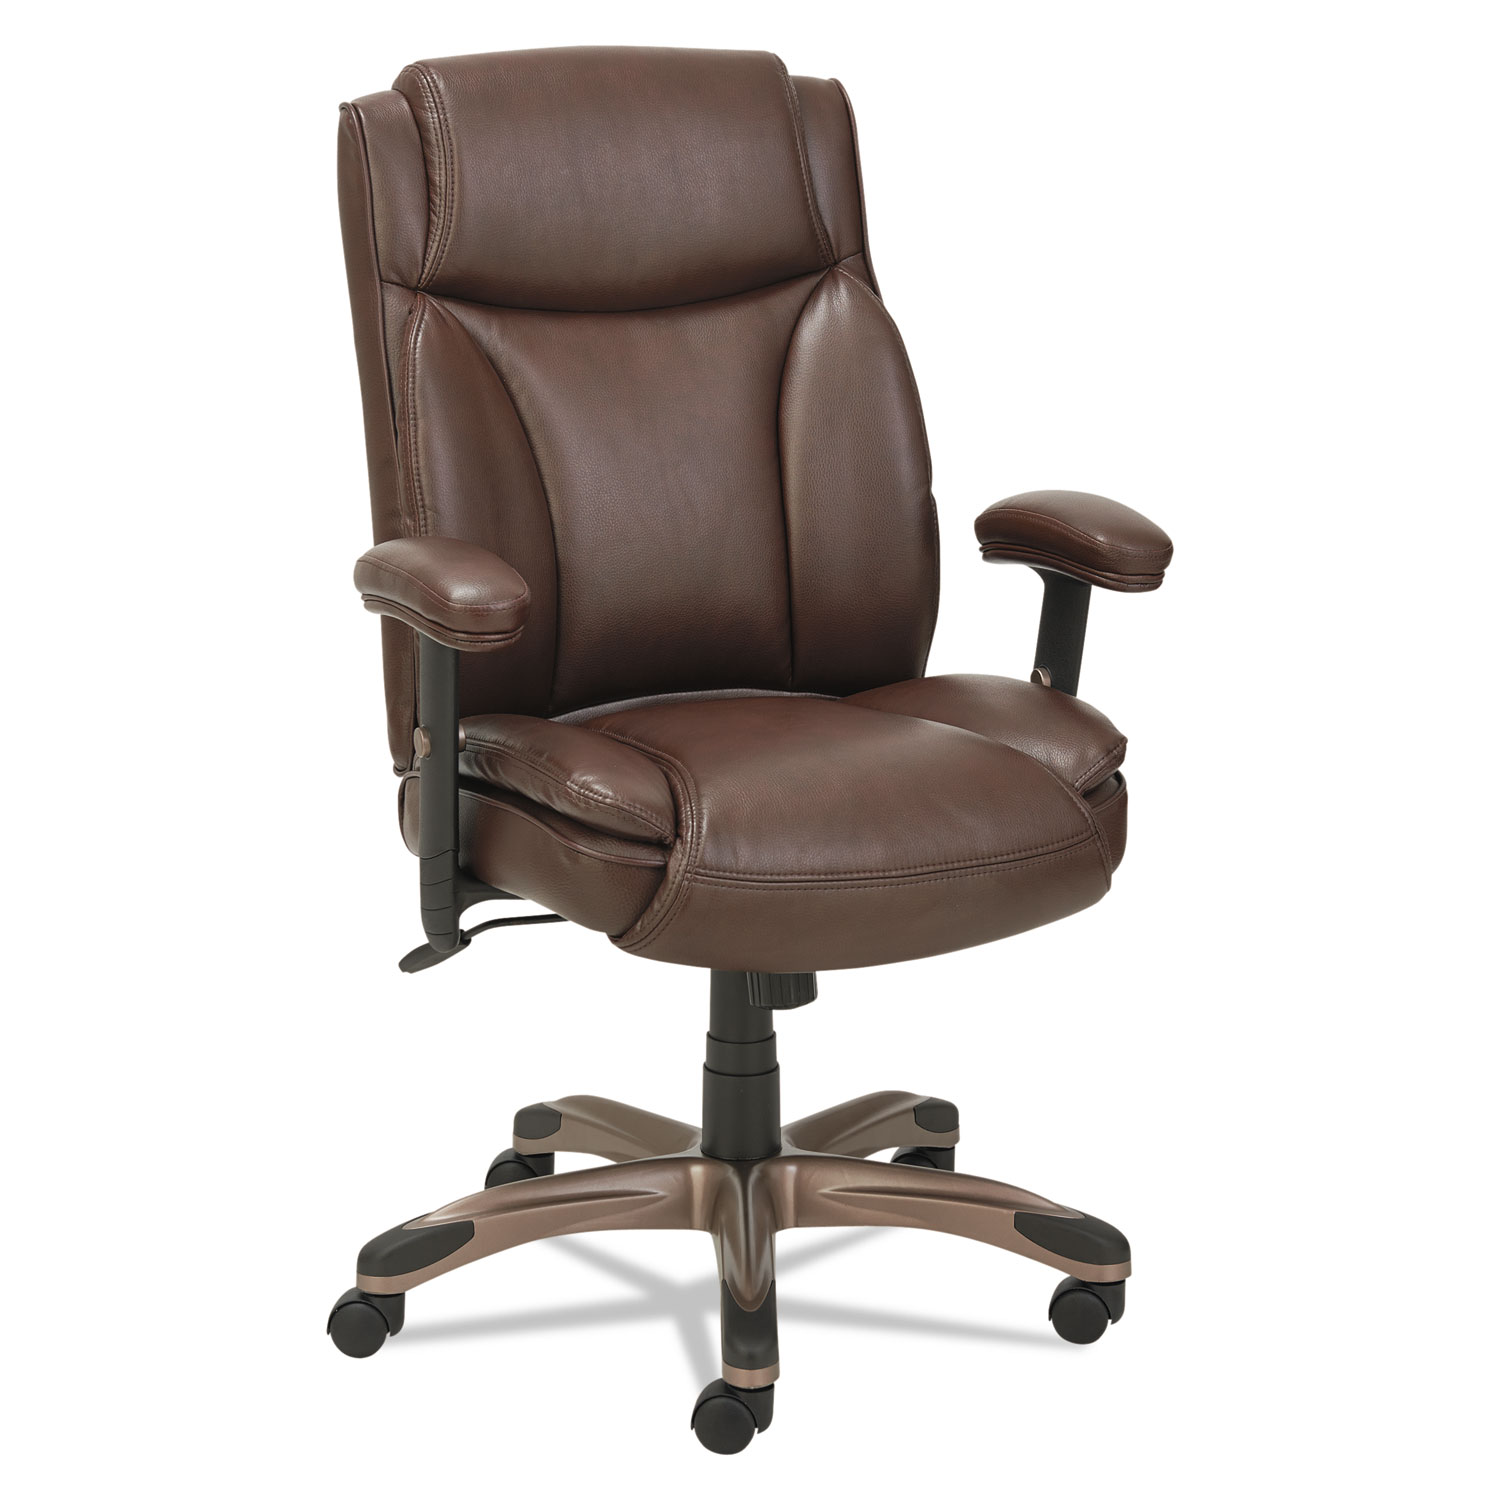  Alera ALEVN5159 Alera Veon Series Leather Mid-Back Manager's Chair, Supports up to 275 lbs., Brown Seat/Brown Back, Bronze Base (ALEVN5159) 